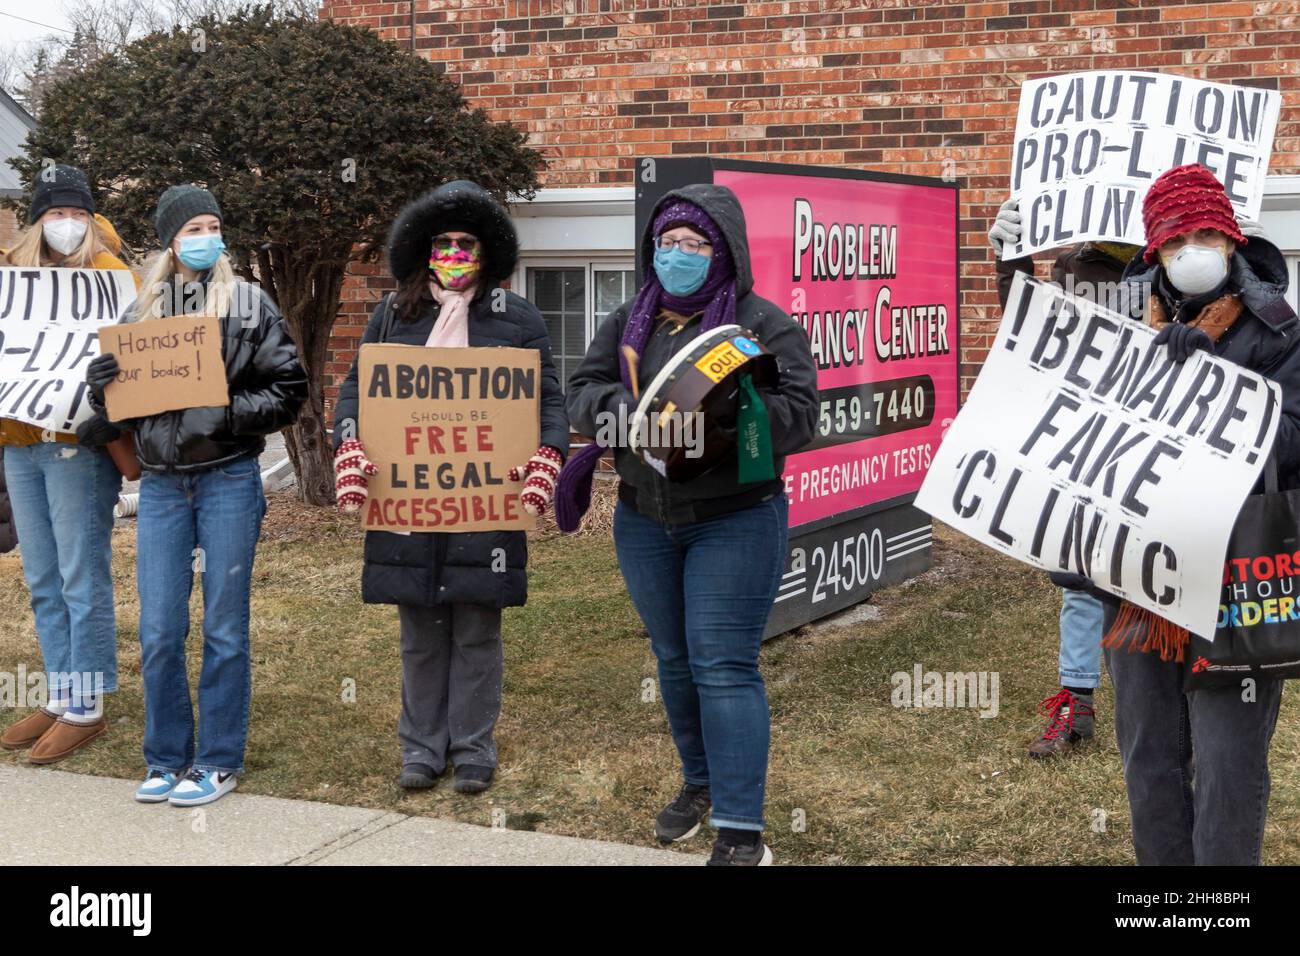 Southfield, Michigan - Abortion rights activists picket the Problem Pregnancy Center, which they said was a 'phony clinic' with an anti-abortion agend Stock Photo